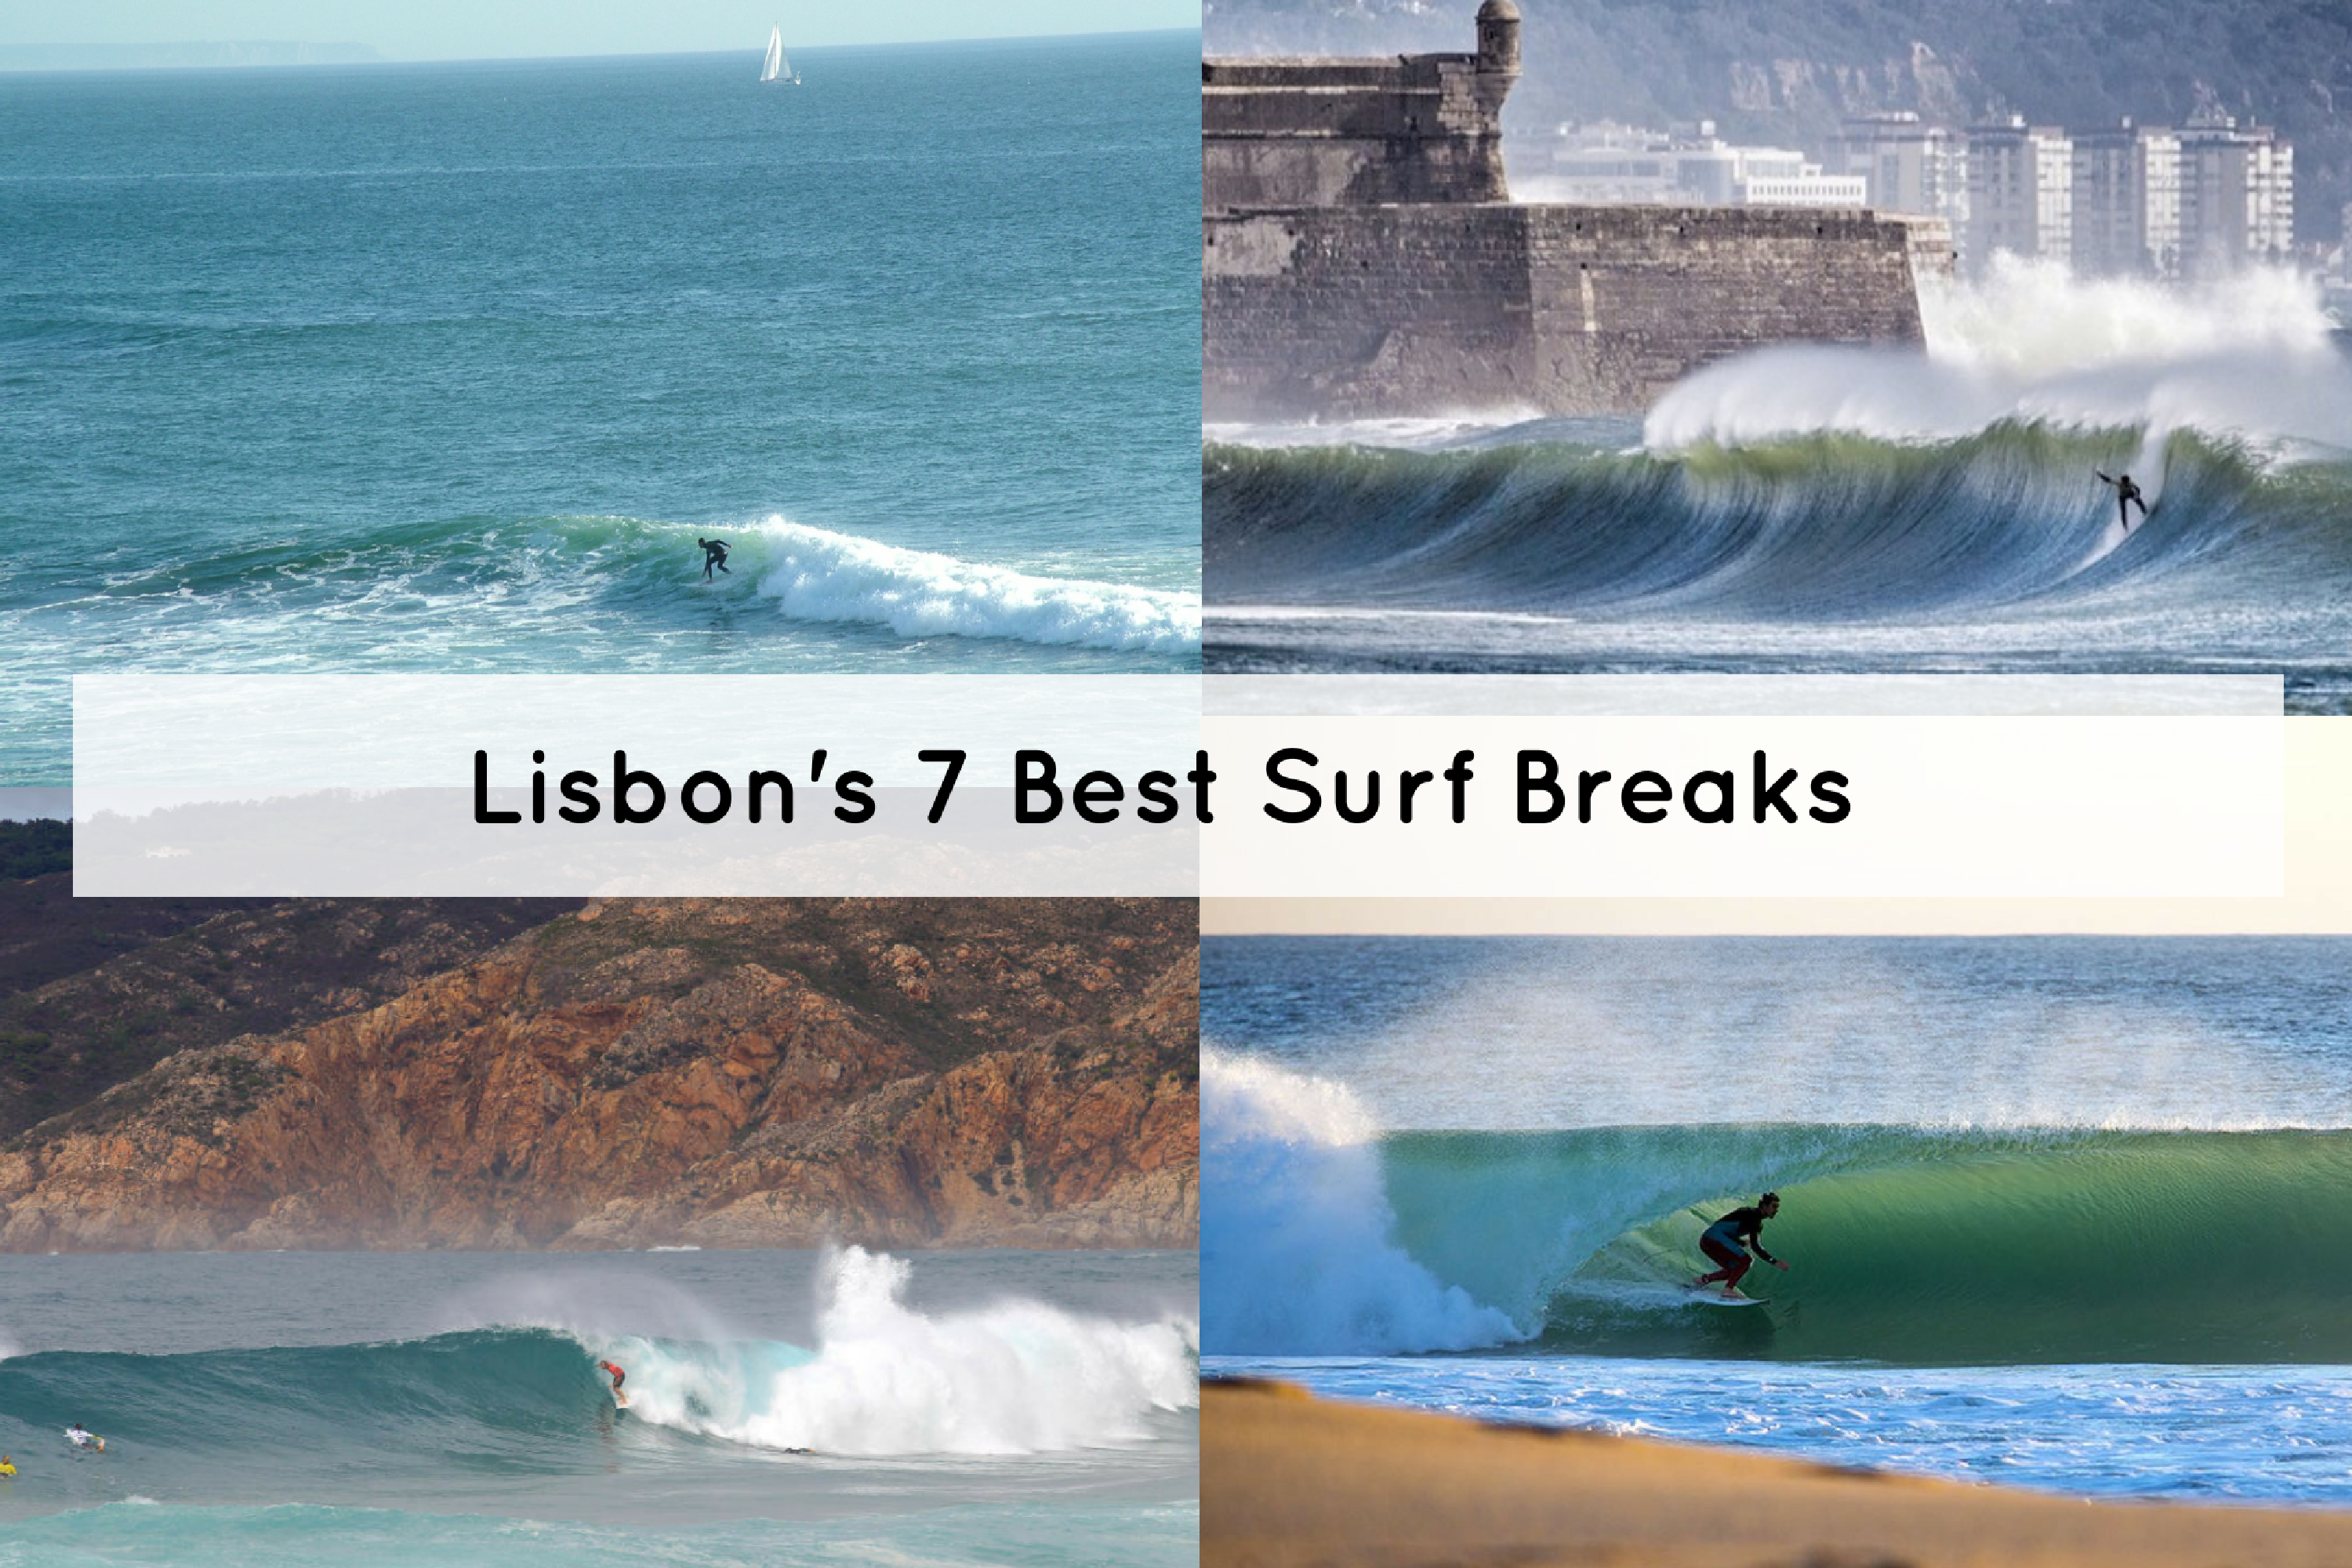 The Top 7 Surf Spots in Lisbon